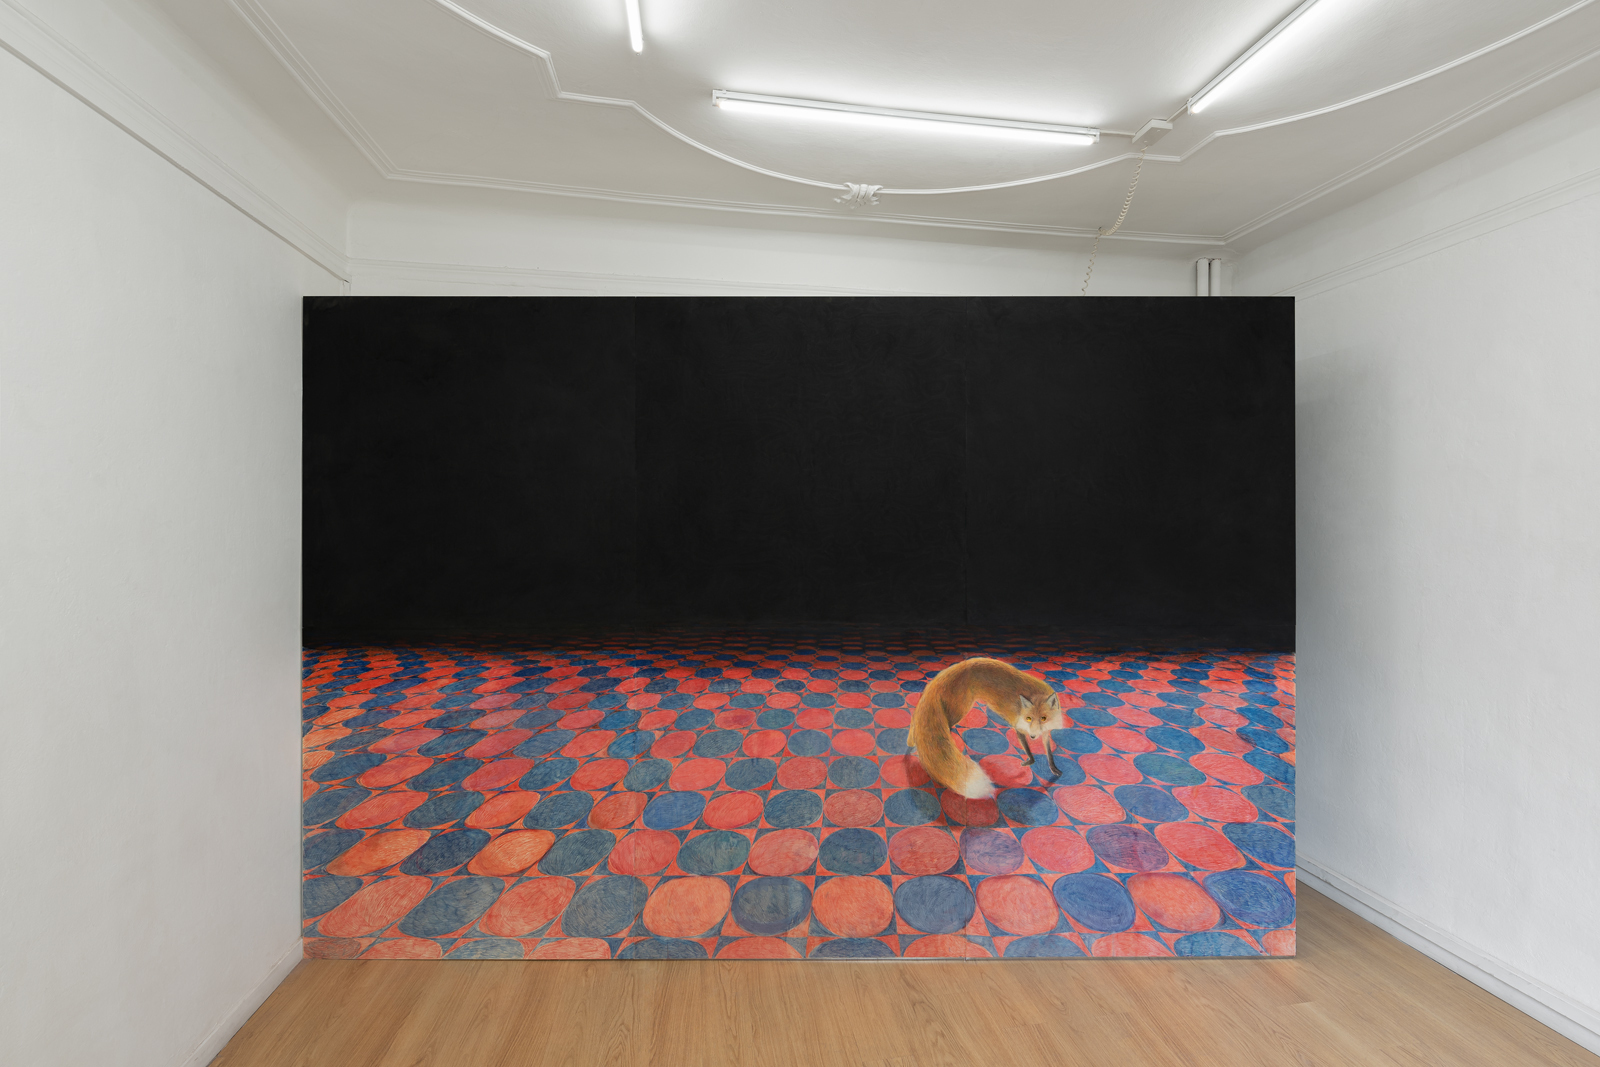 Valerio Nicolai, Sole con le code, 2022 Crayons and acrylics on wood panels, performer, 450 x 300 x 110 cm Courtesy: Clima, Milan